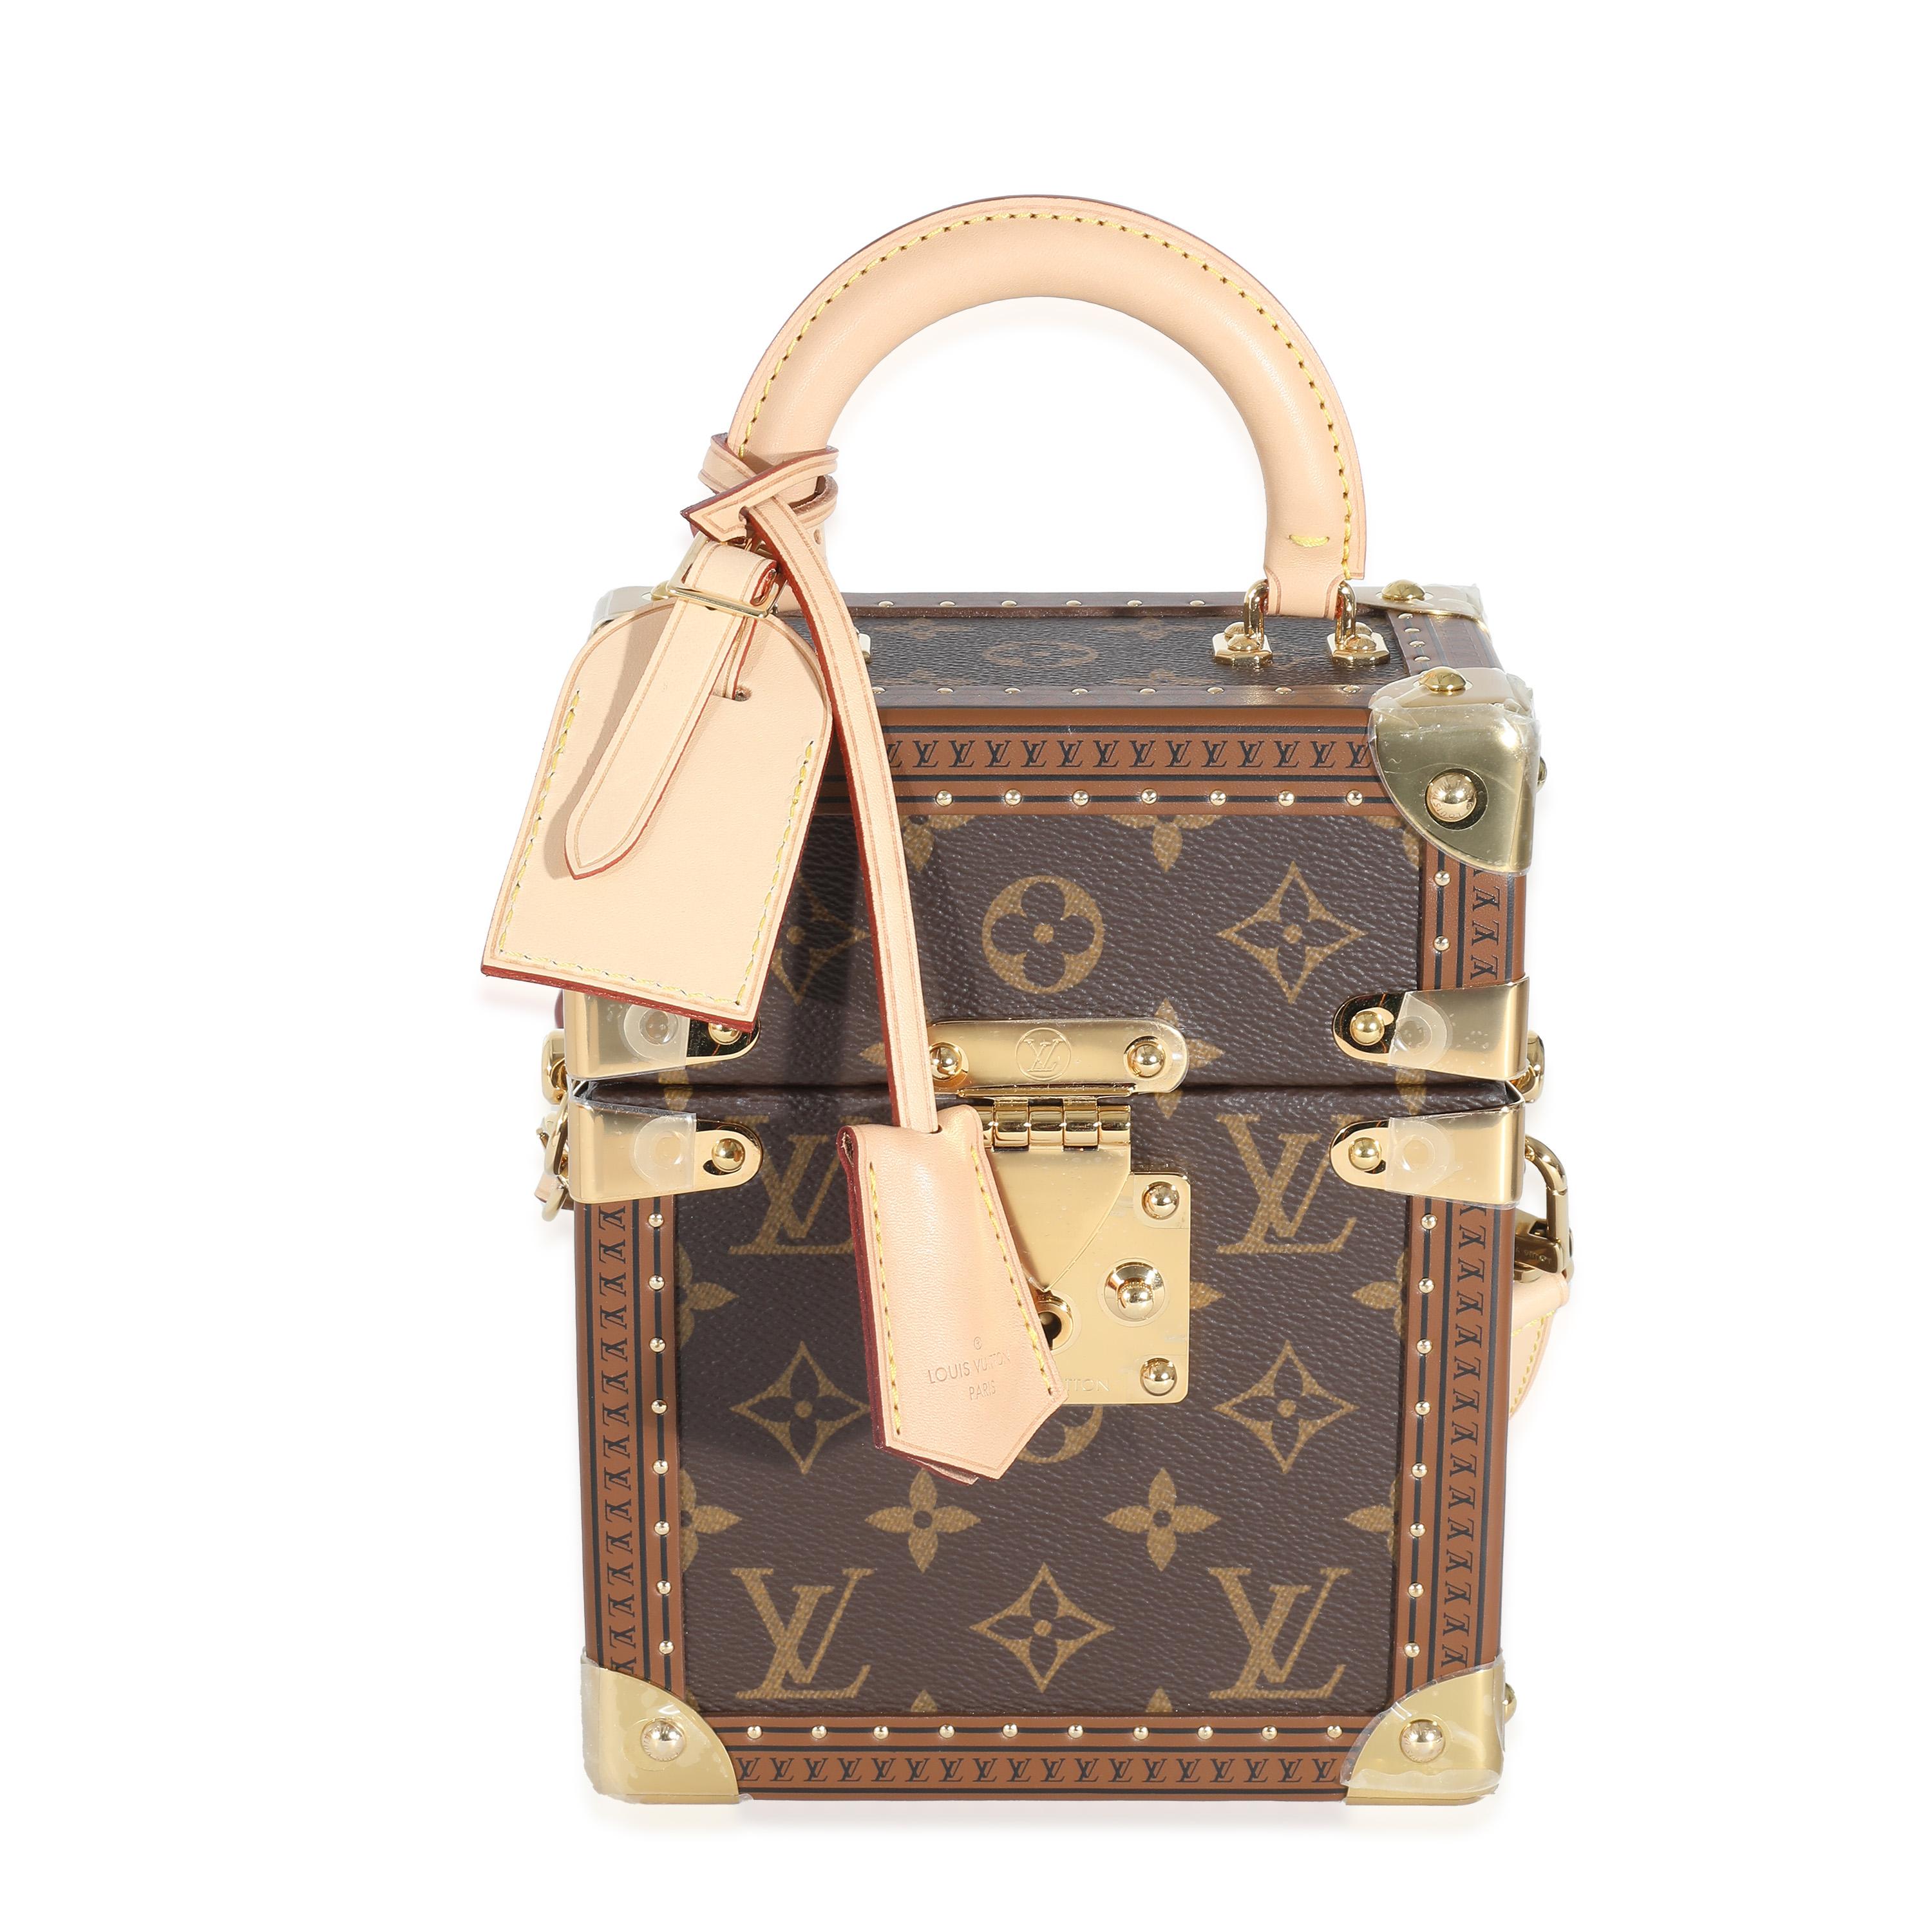 Listing Title: Louis Vuitton Monogram Canvas Camera Box
SKU: 137031
MSRP: 8800.00 USD
Condition: Pre-owned 
Condition Description: Comes with the original box.
Handbag Condition: Excellent
Condition Comments: Item is in excellent condition and